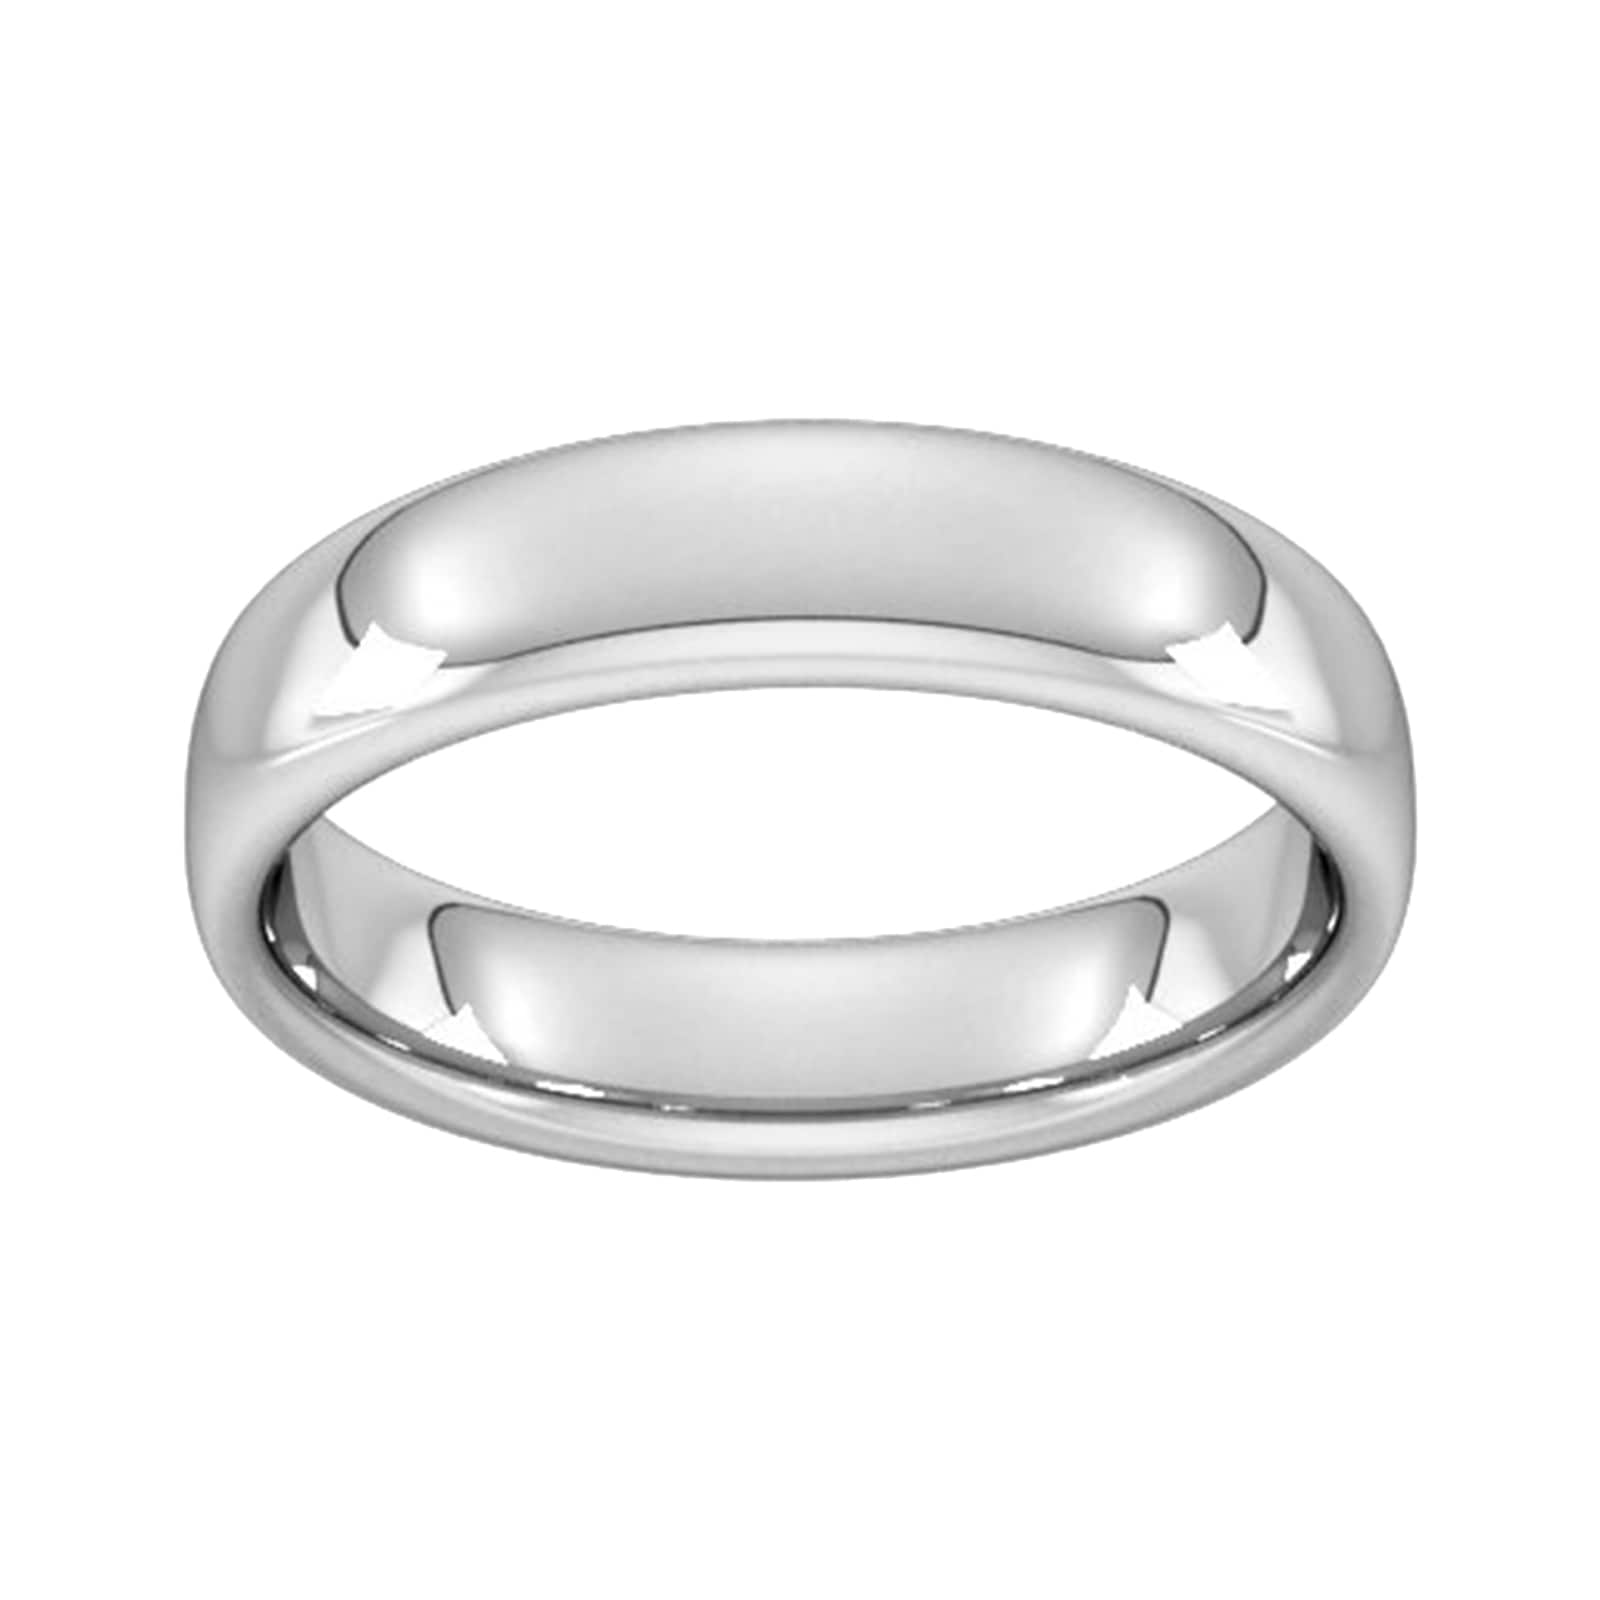 5mm Slight Court Heavy Wedding Ring In Sterling Silver - Ring Size H